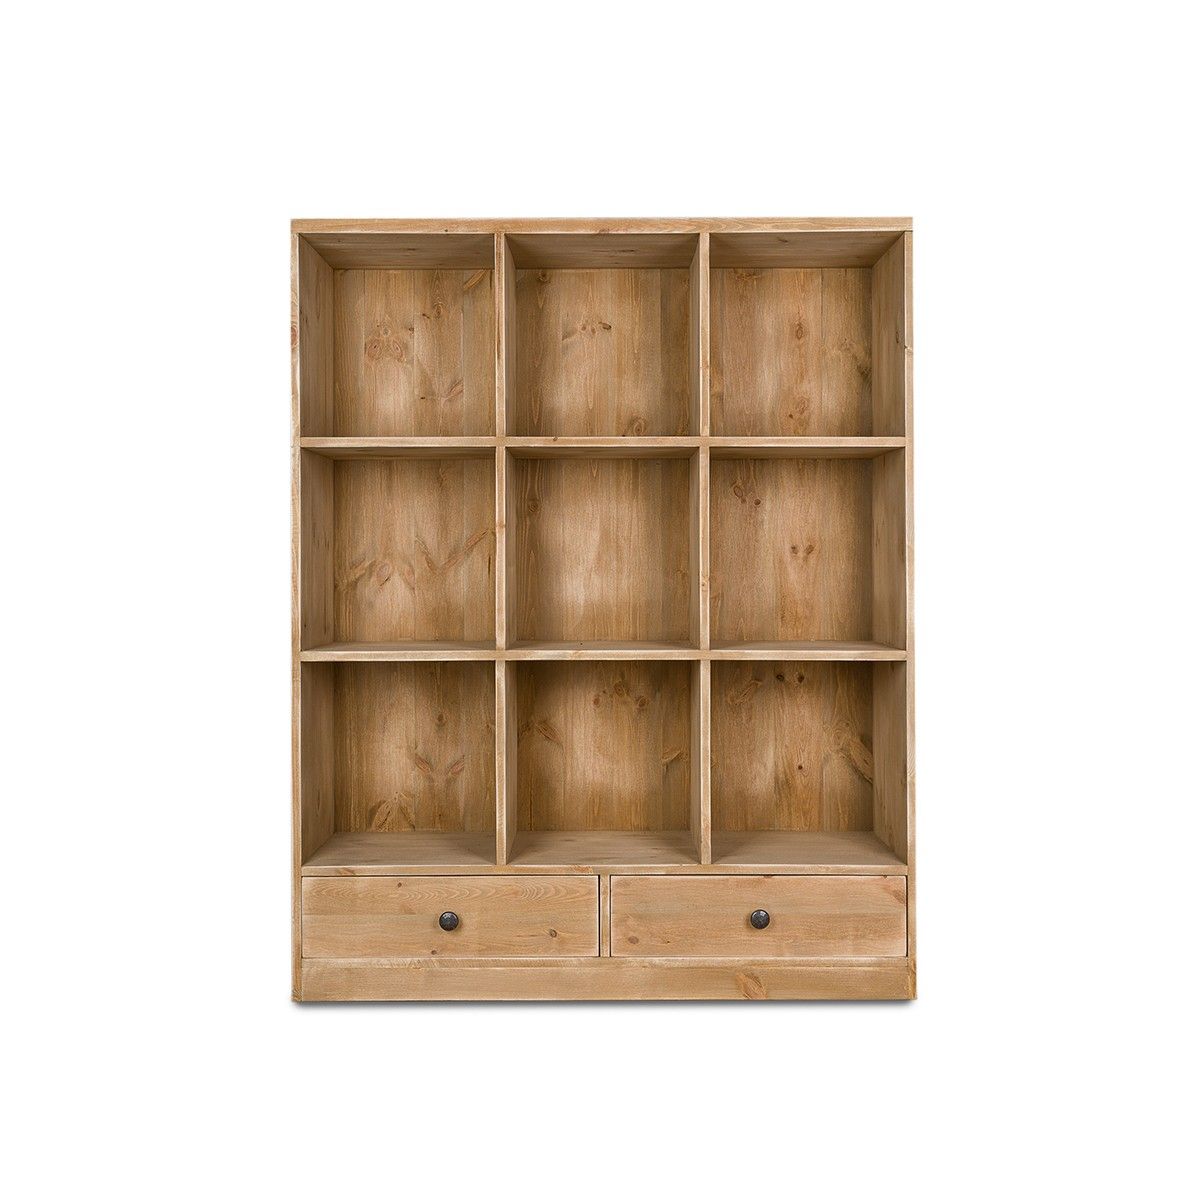 Bookcase In Solid Wood Rosalie| Dendro Inside Wooden Compartment Bookcases (View 3 of 15)